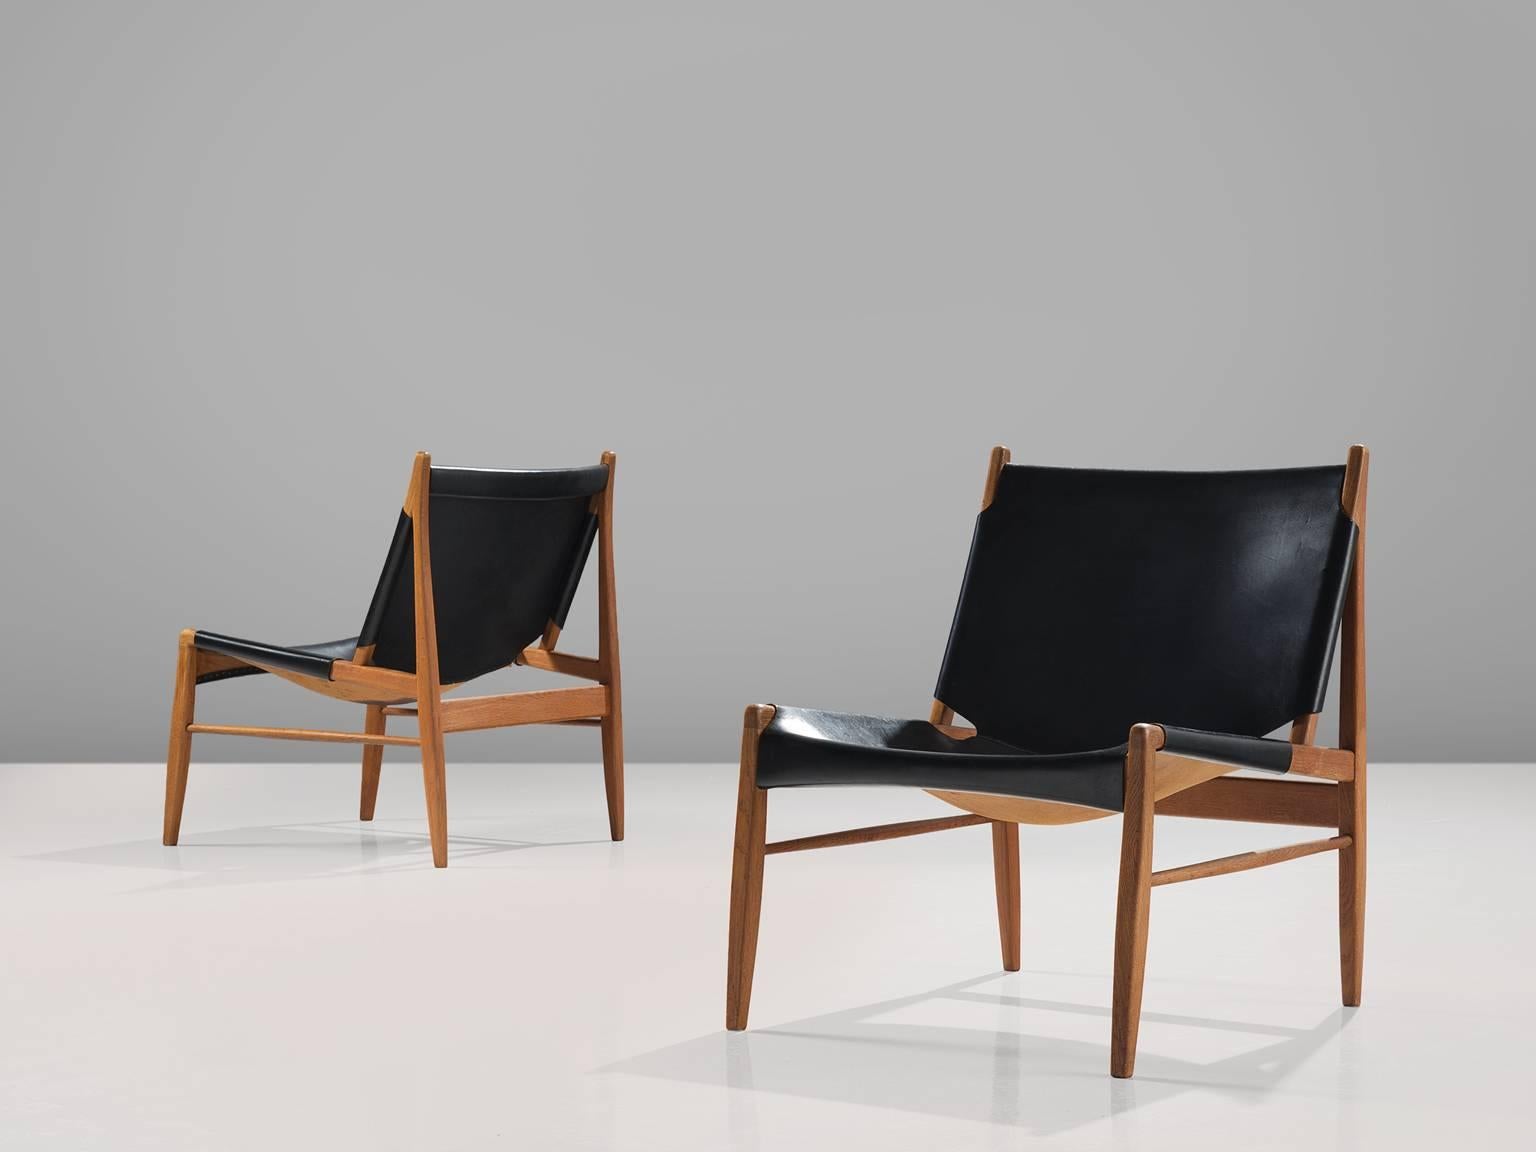 Franz Xaver Lutz for WK Verband, 'Chimney' chairs, oak and patinated black leather, Germany, 1958. 

These early Chimney chairs by Franz Xaver Lutz bear strong resemblances to Spanish and Scandinavian hunting chairs. The design is aptly named